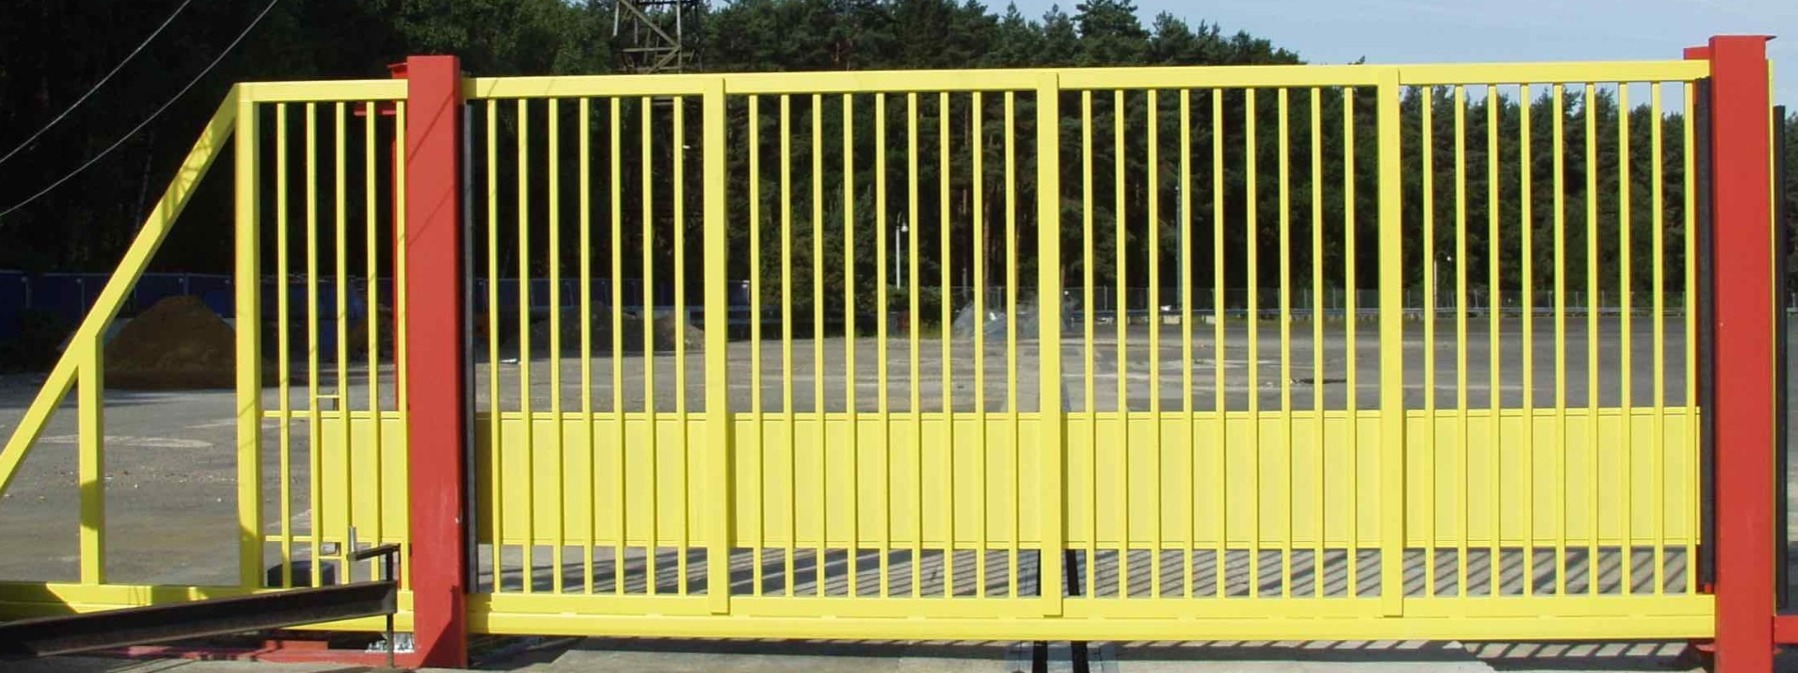 CSG 10140 Sliding gate for wide entrances withstanding impacts of up to 40mph